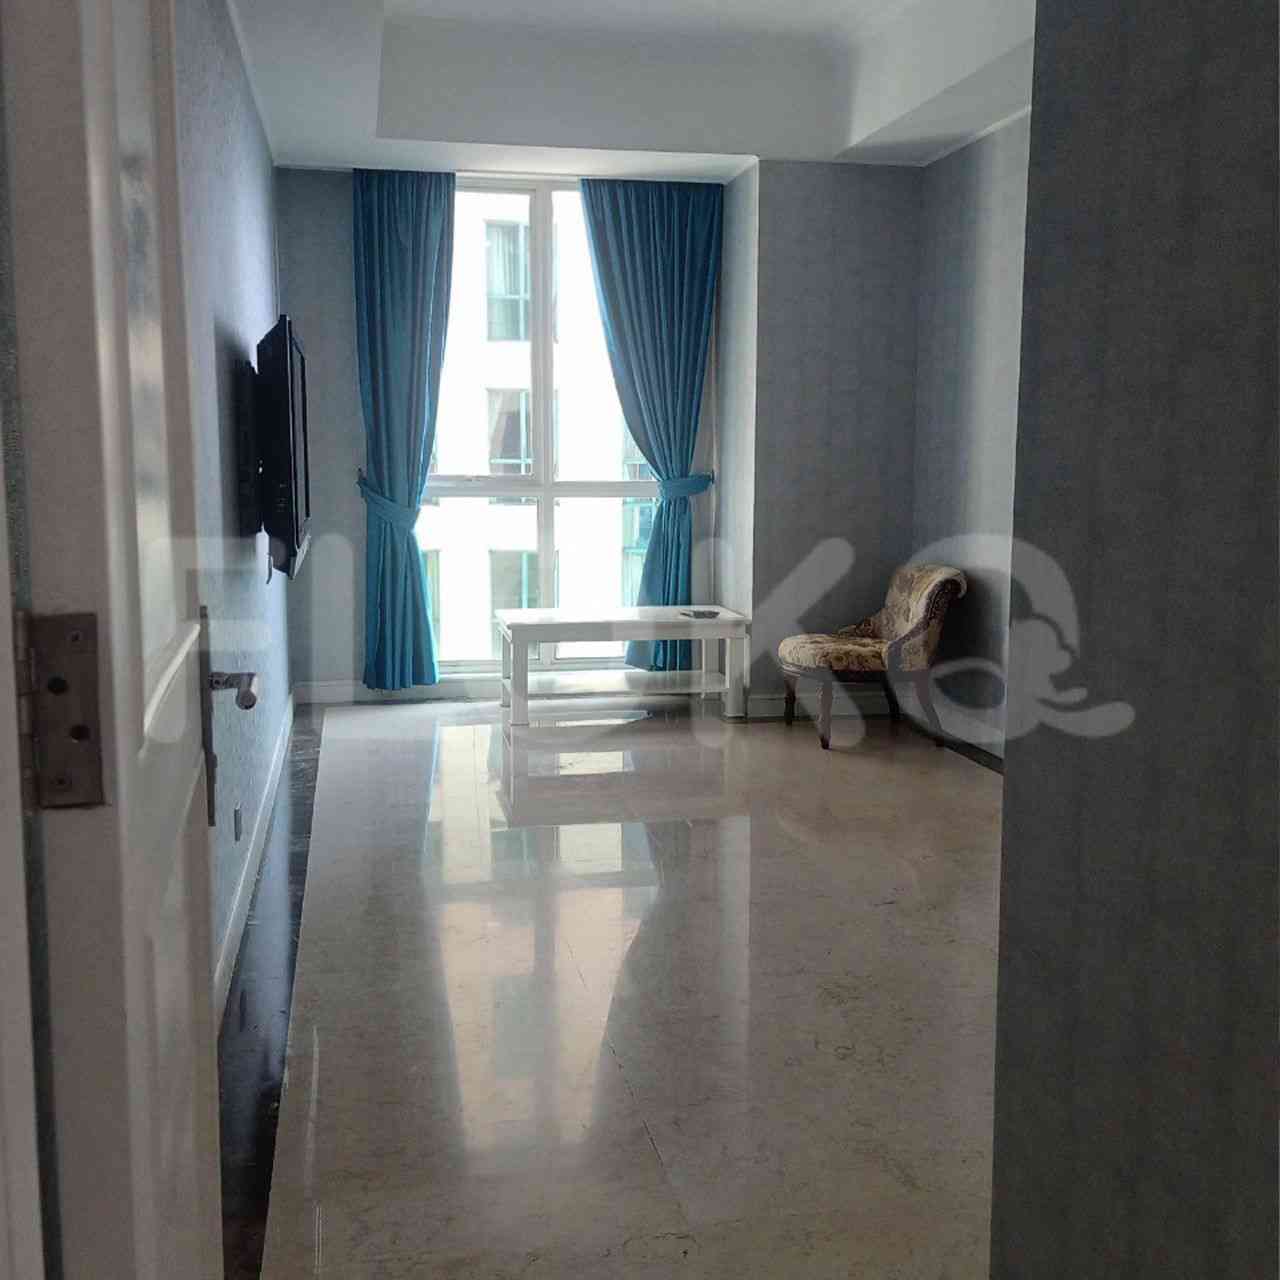 3 Bedroom on 15th Floor for Rent in Casablanca Apartment - ftebd9 4